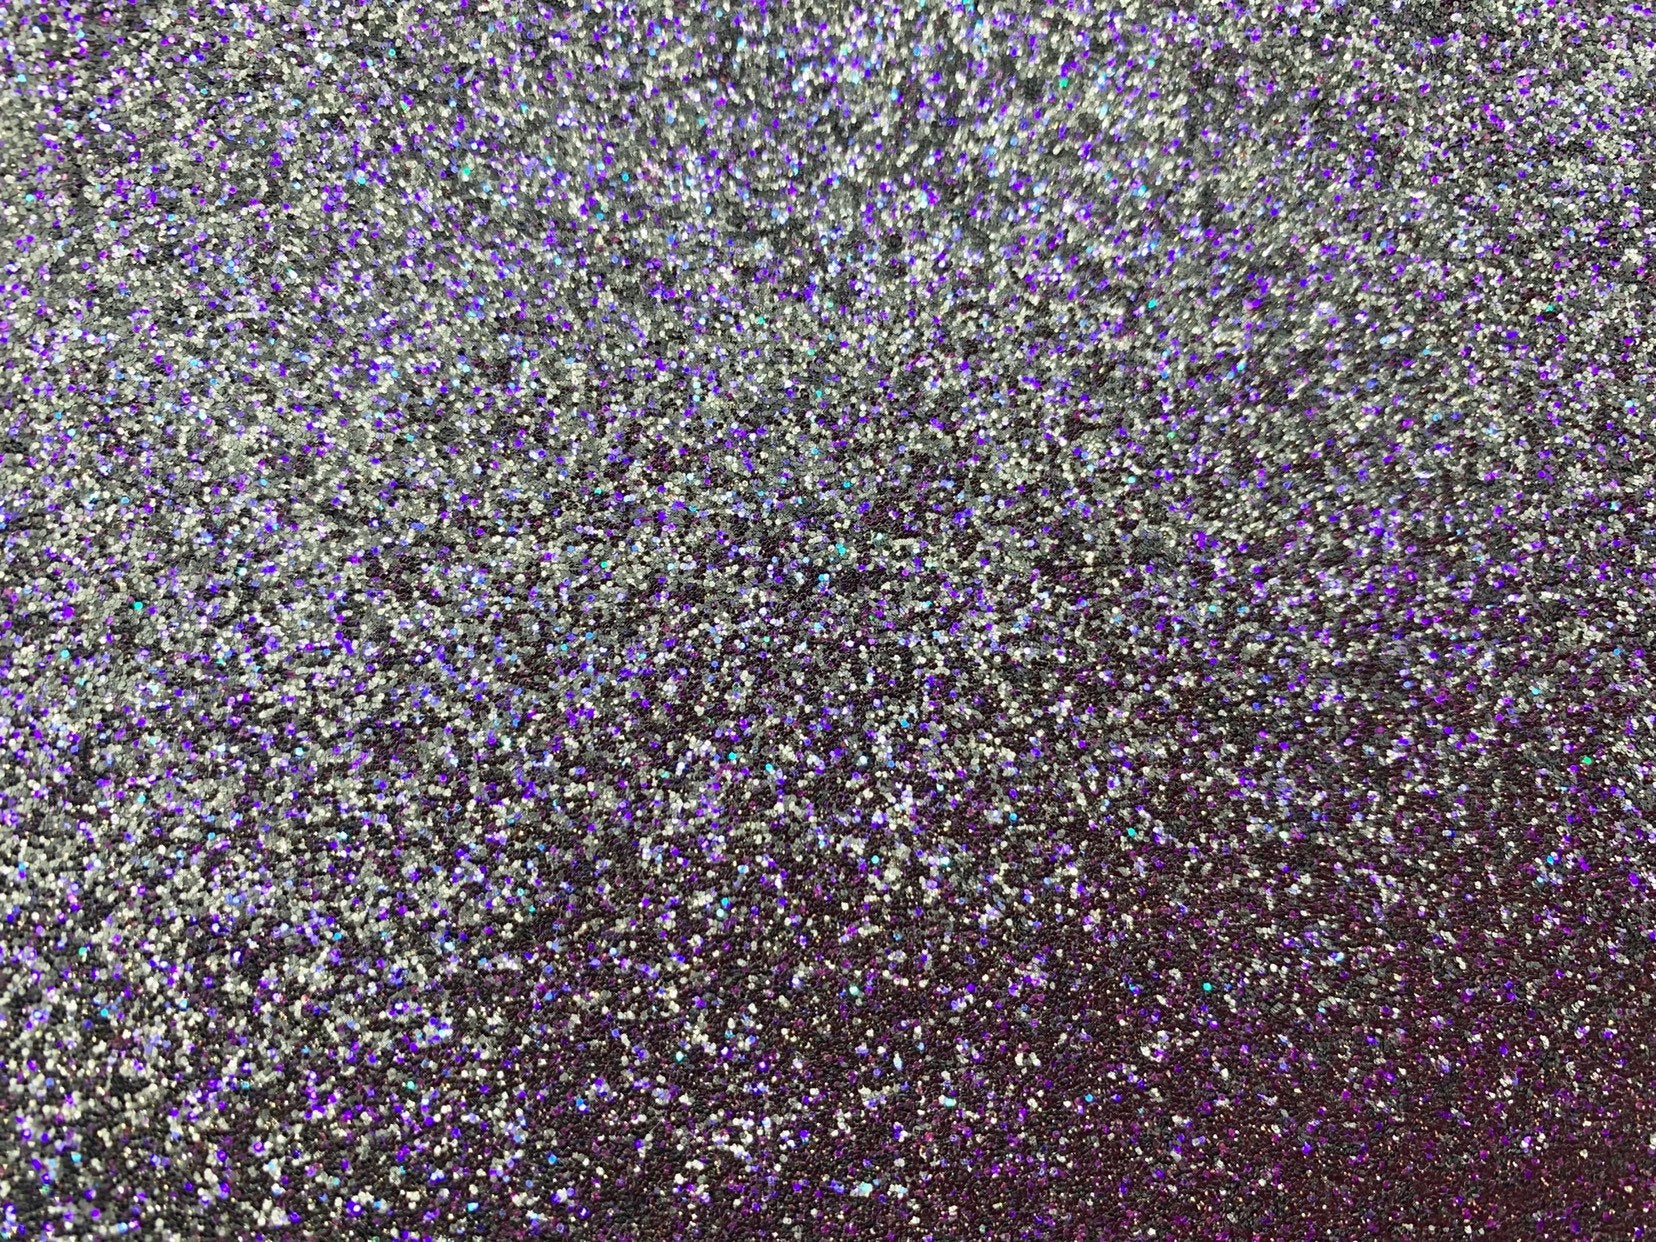 1 sheet, 20x34cm, Synthetic / Glittered PU Leather fabric for DIY earring pendants purse or bow in navy and silver glitter